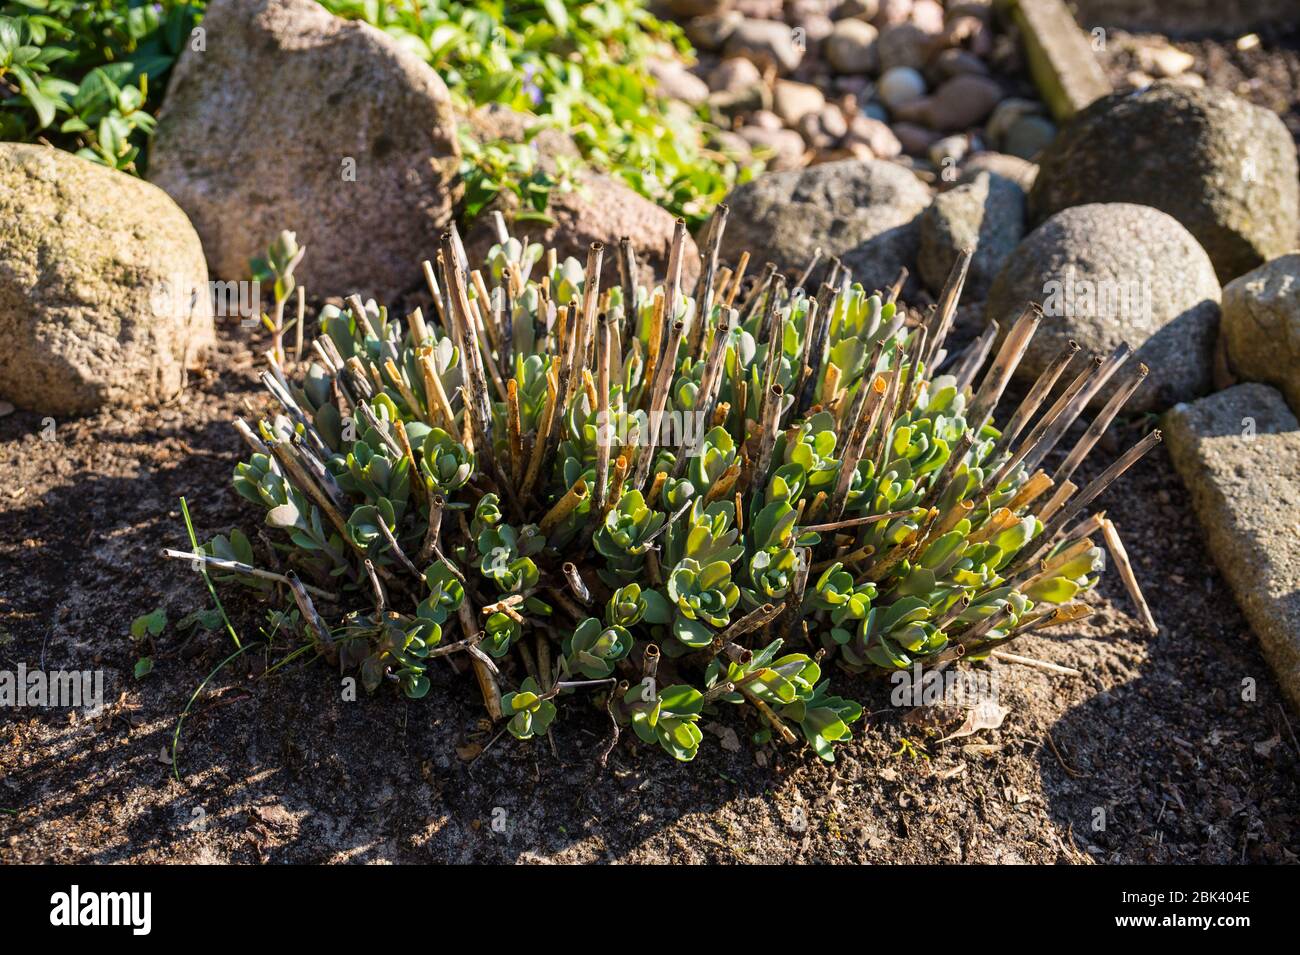 Sedum is a large genus of flowering plants in the family Crassulaceae. Spring in the rock garden. Stock Photo